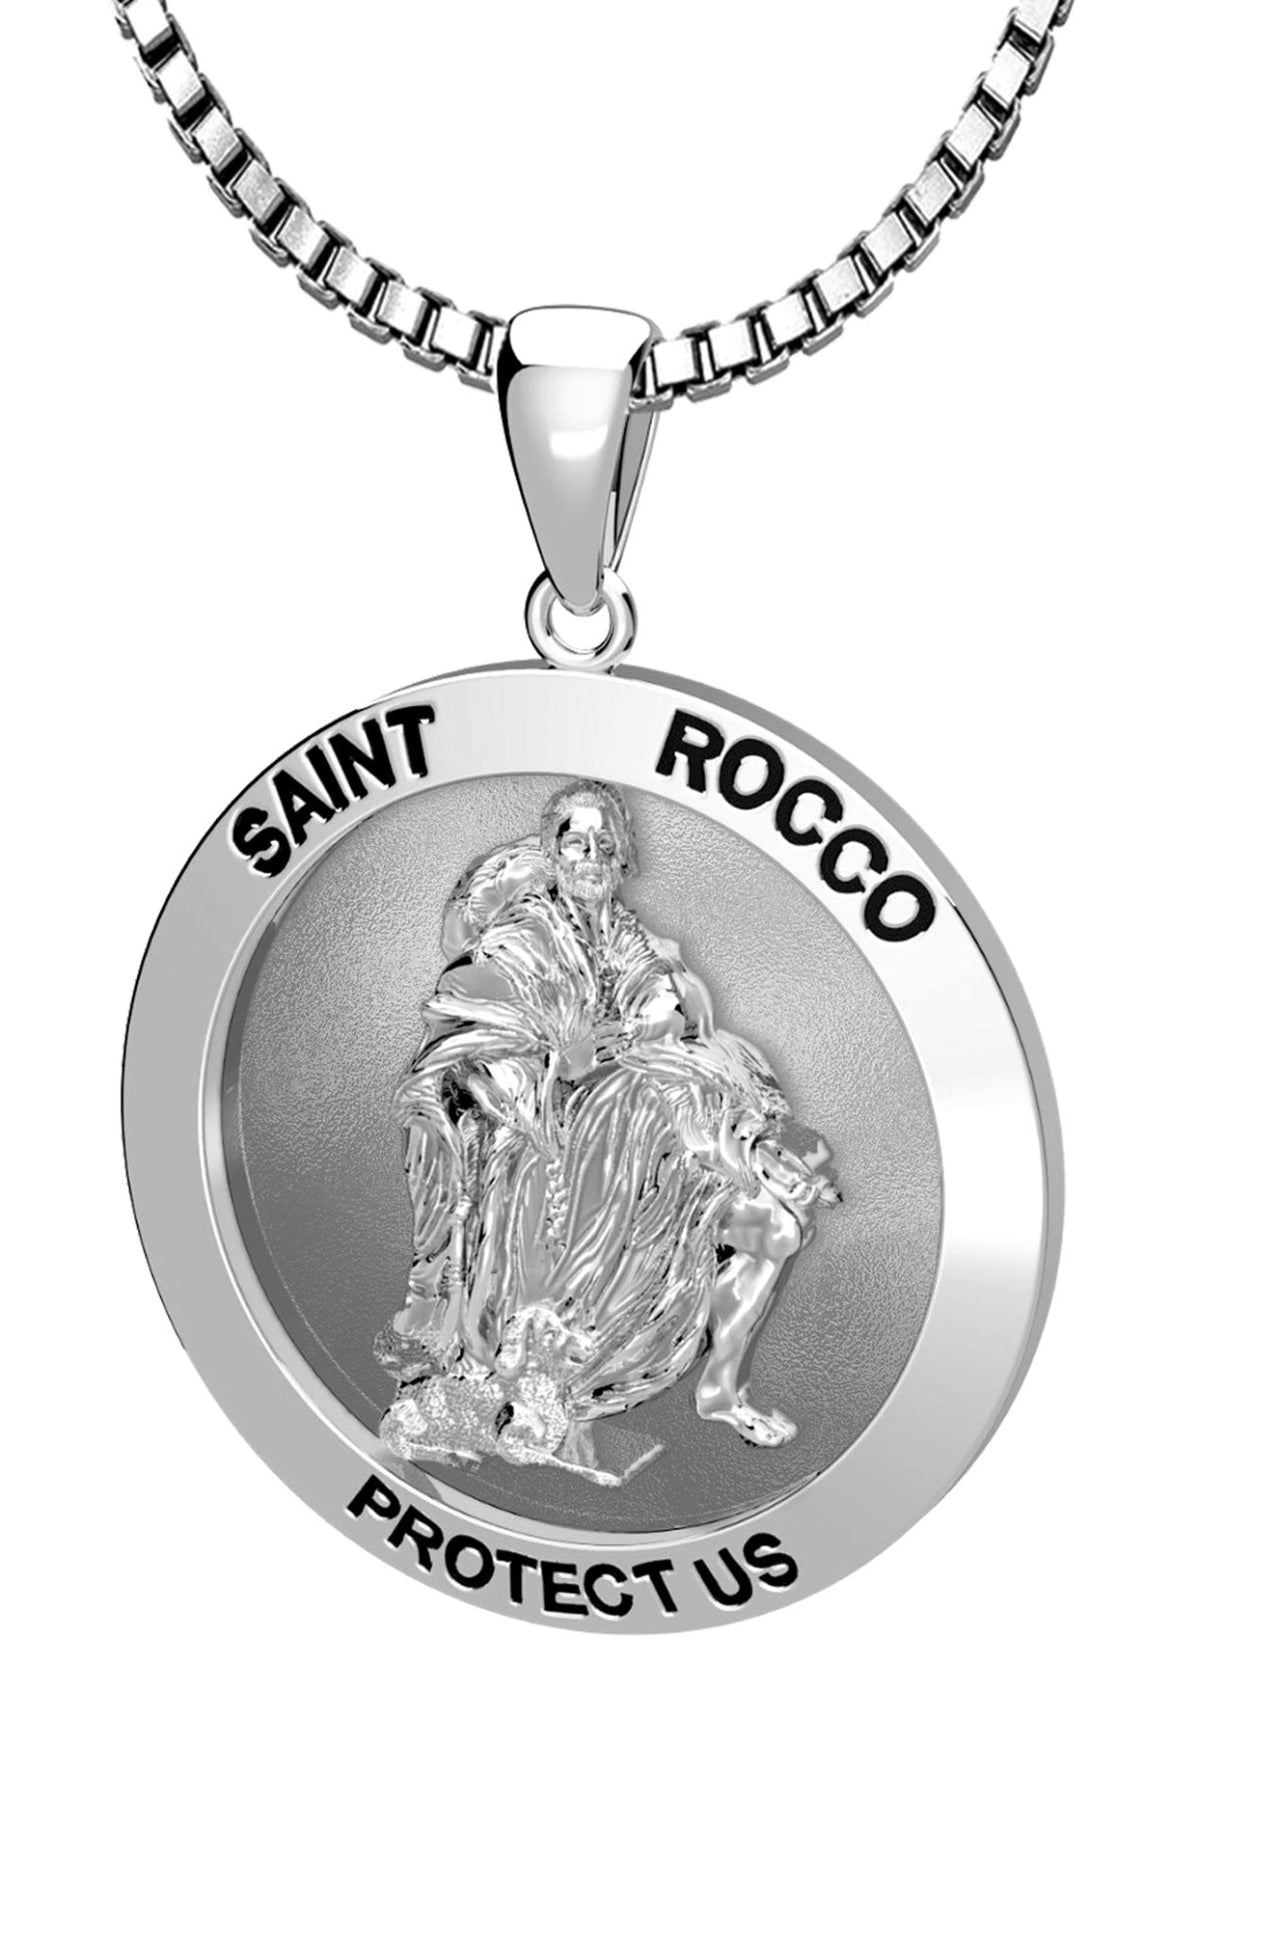 Ladies 925 Sterling Silver Saint Rocco Pendant Necklace, 18mm or 22mm - US Jewels